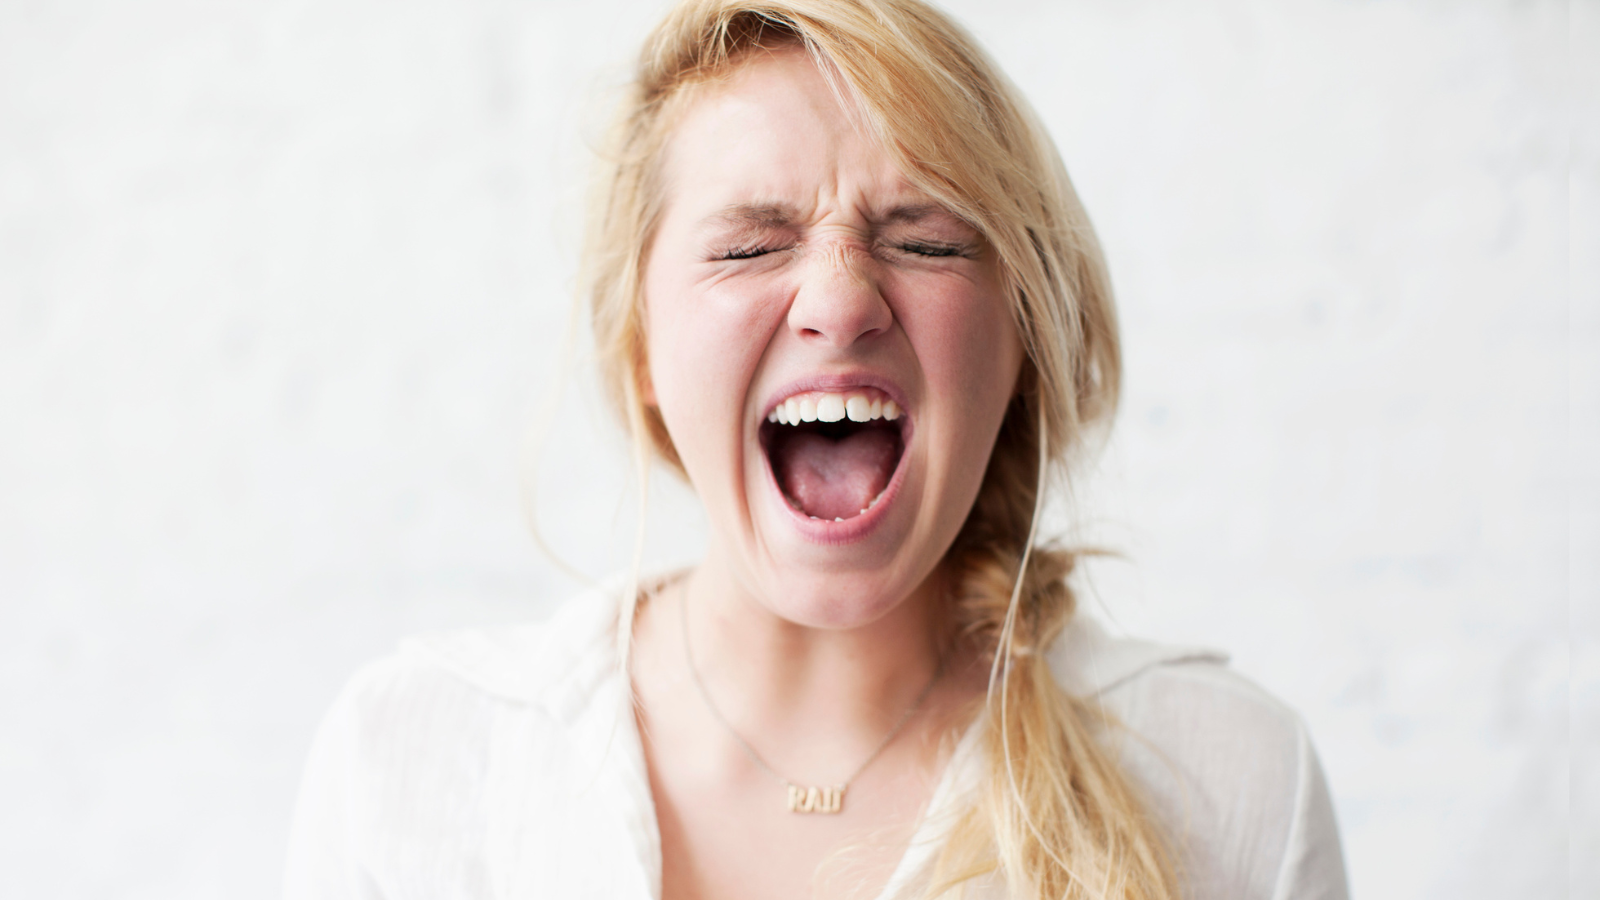 A blonde woman yelling.